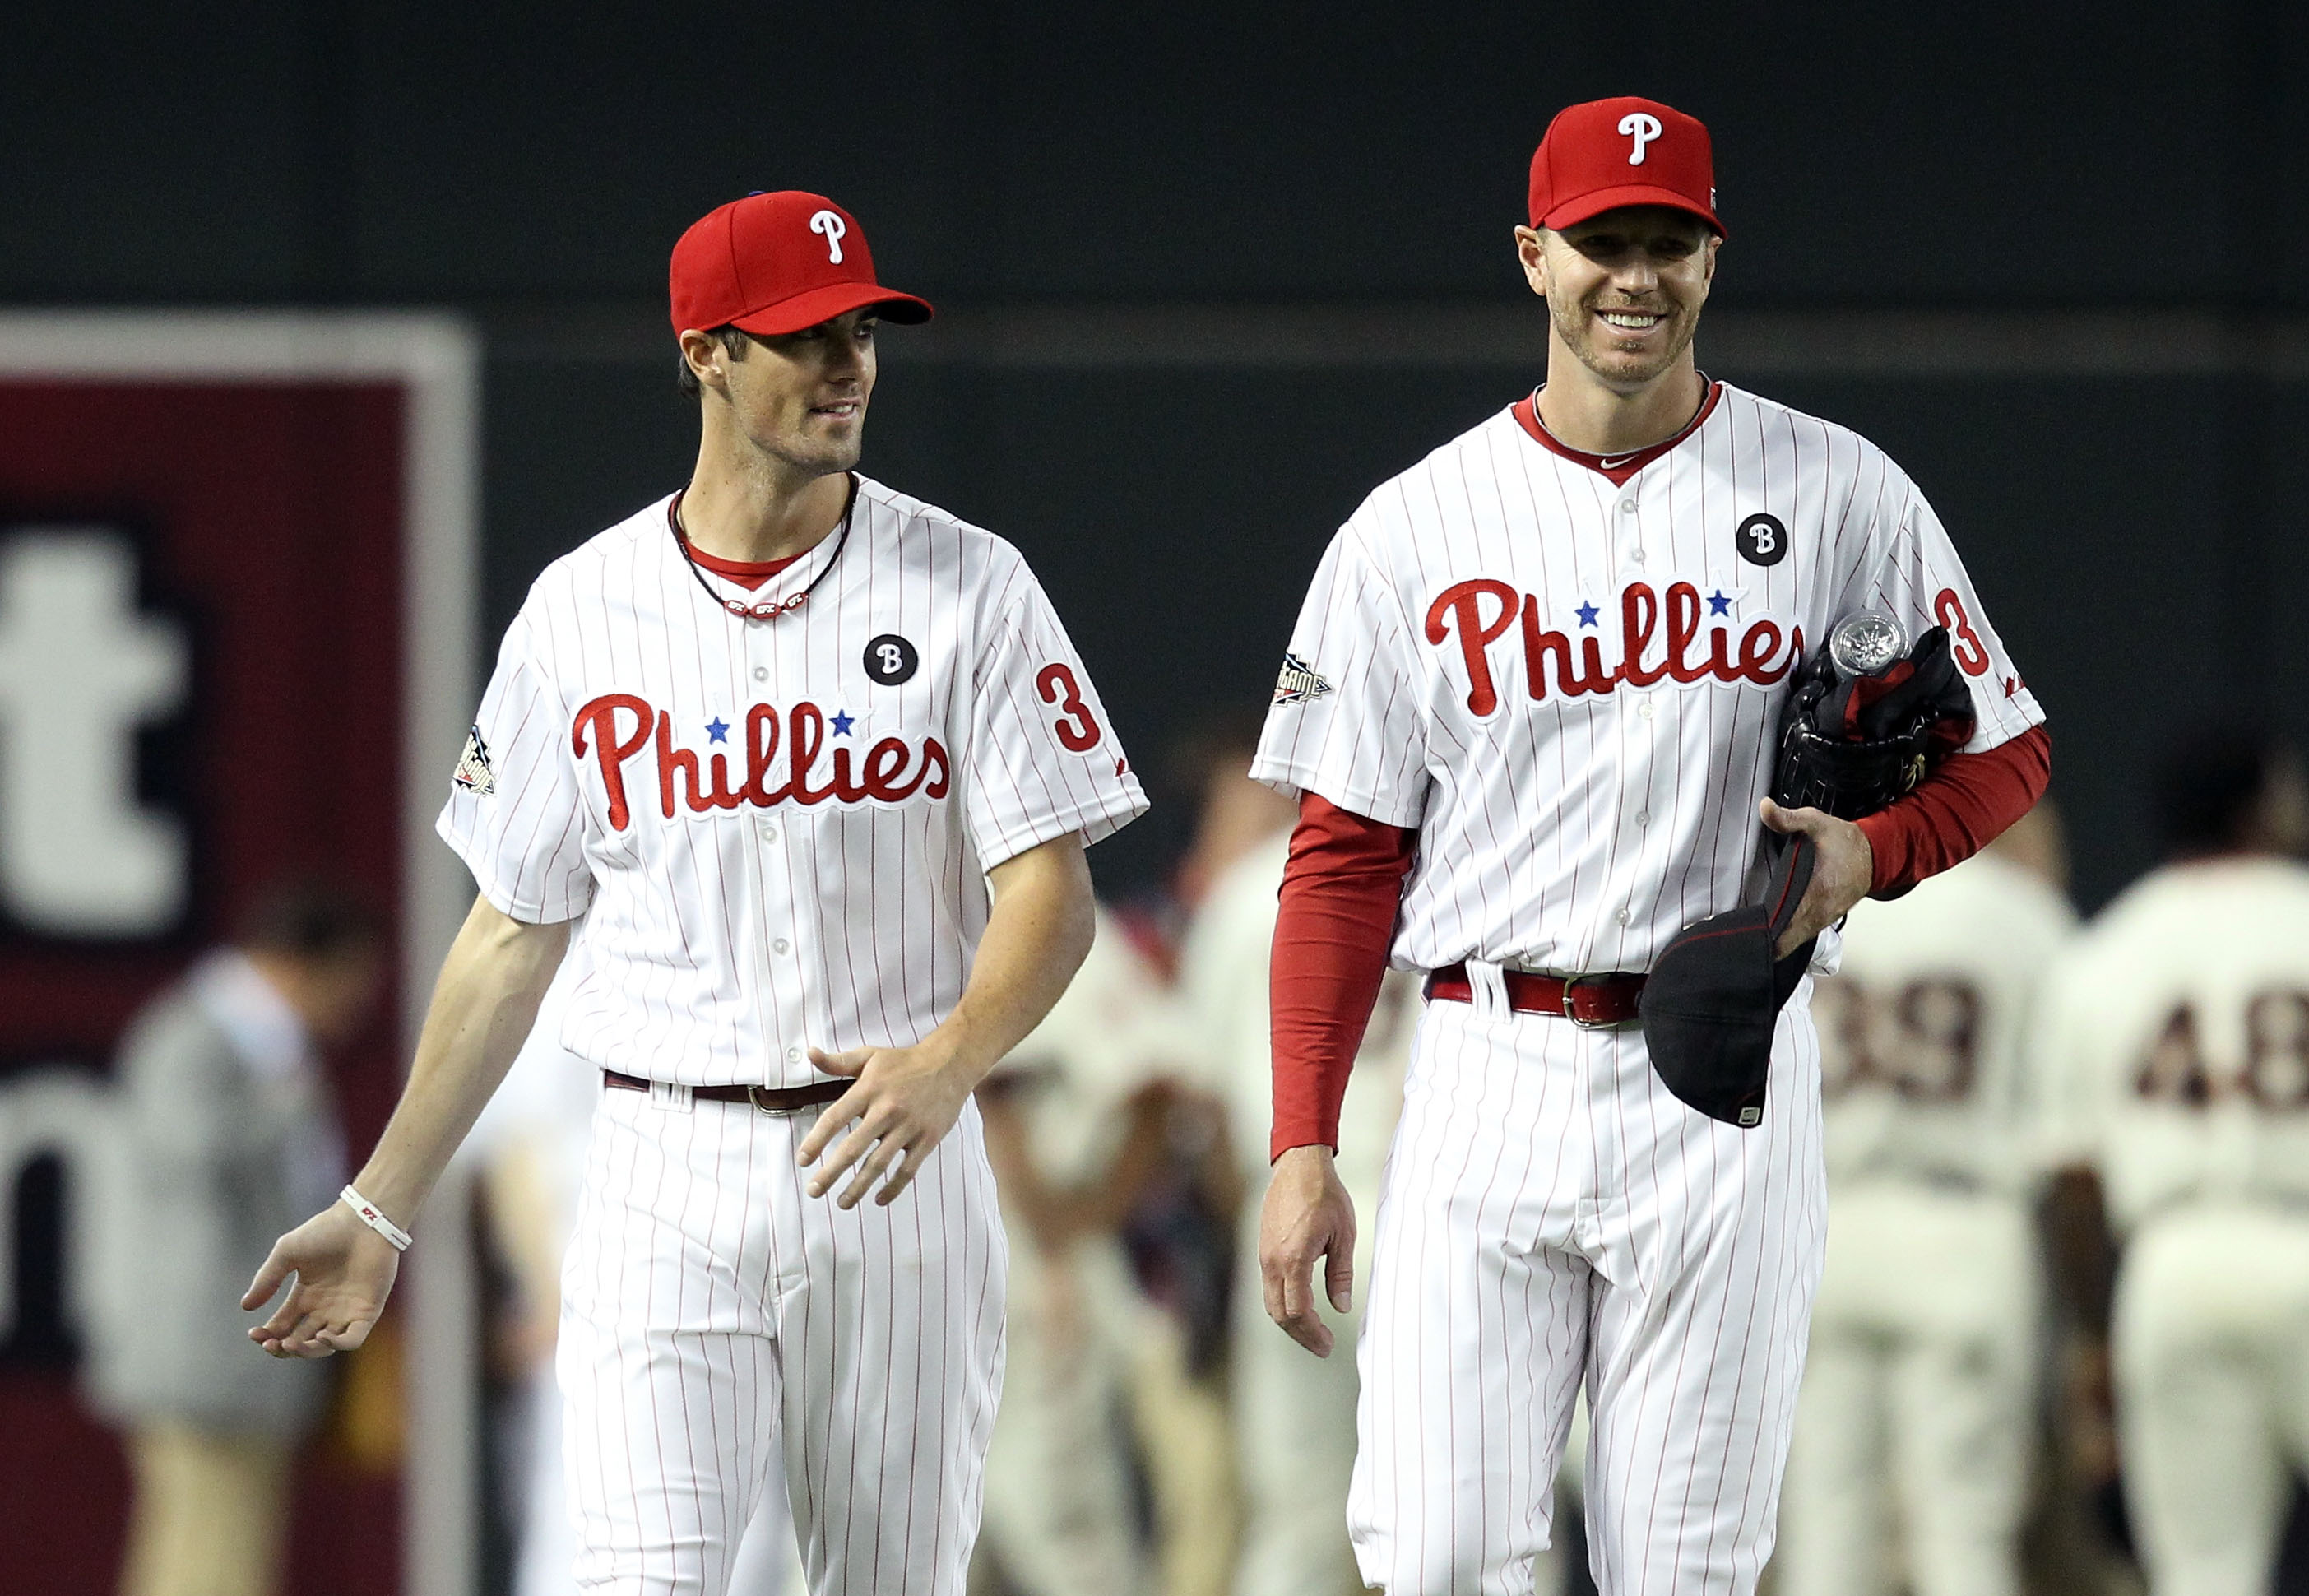 The Phillies should seriously consider signing Cole Hamels - The Good Phight